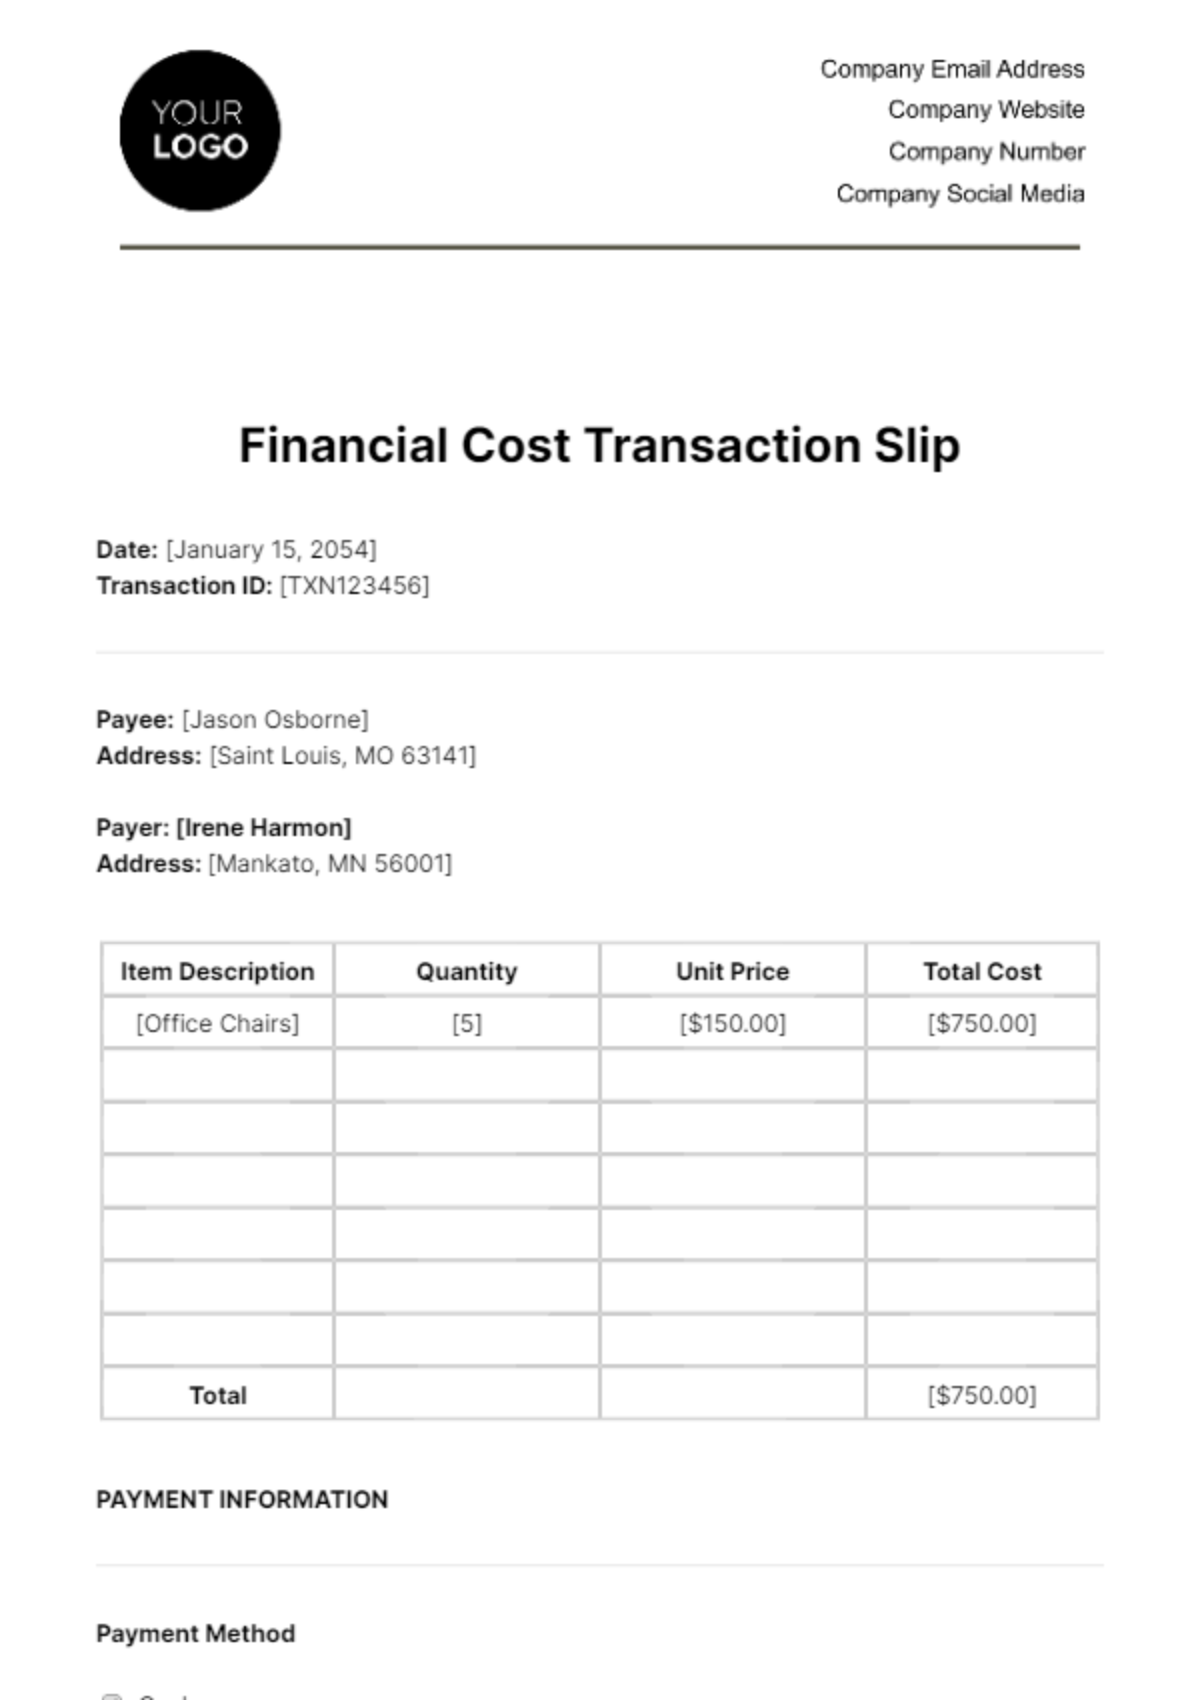 Free Financial Cost Transaction Slip Template